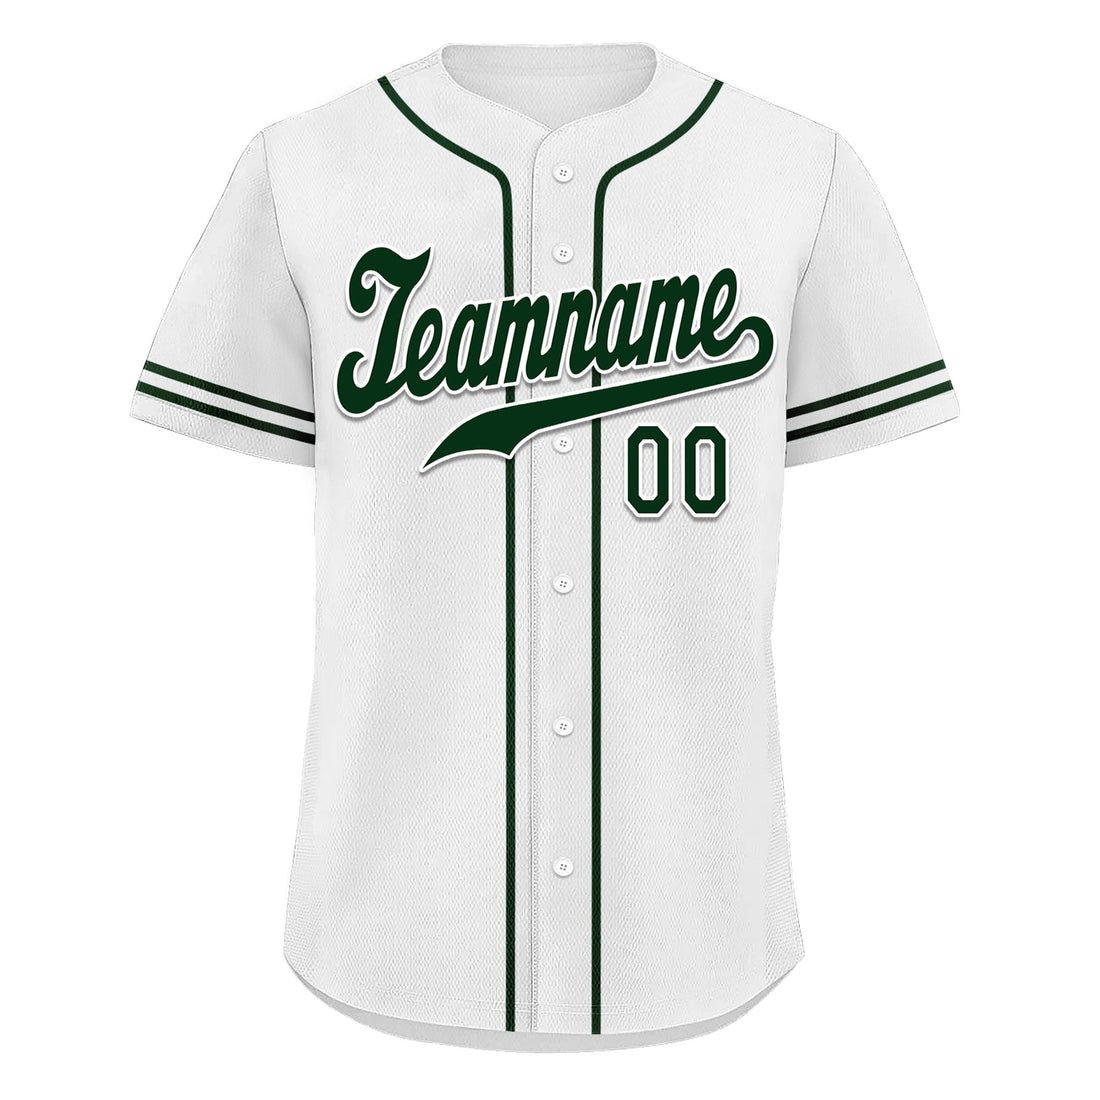 Custom White Classic Style Black Personalized Authentic Baseball Jersey UN002-bd0b00d8-a7